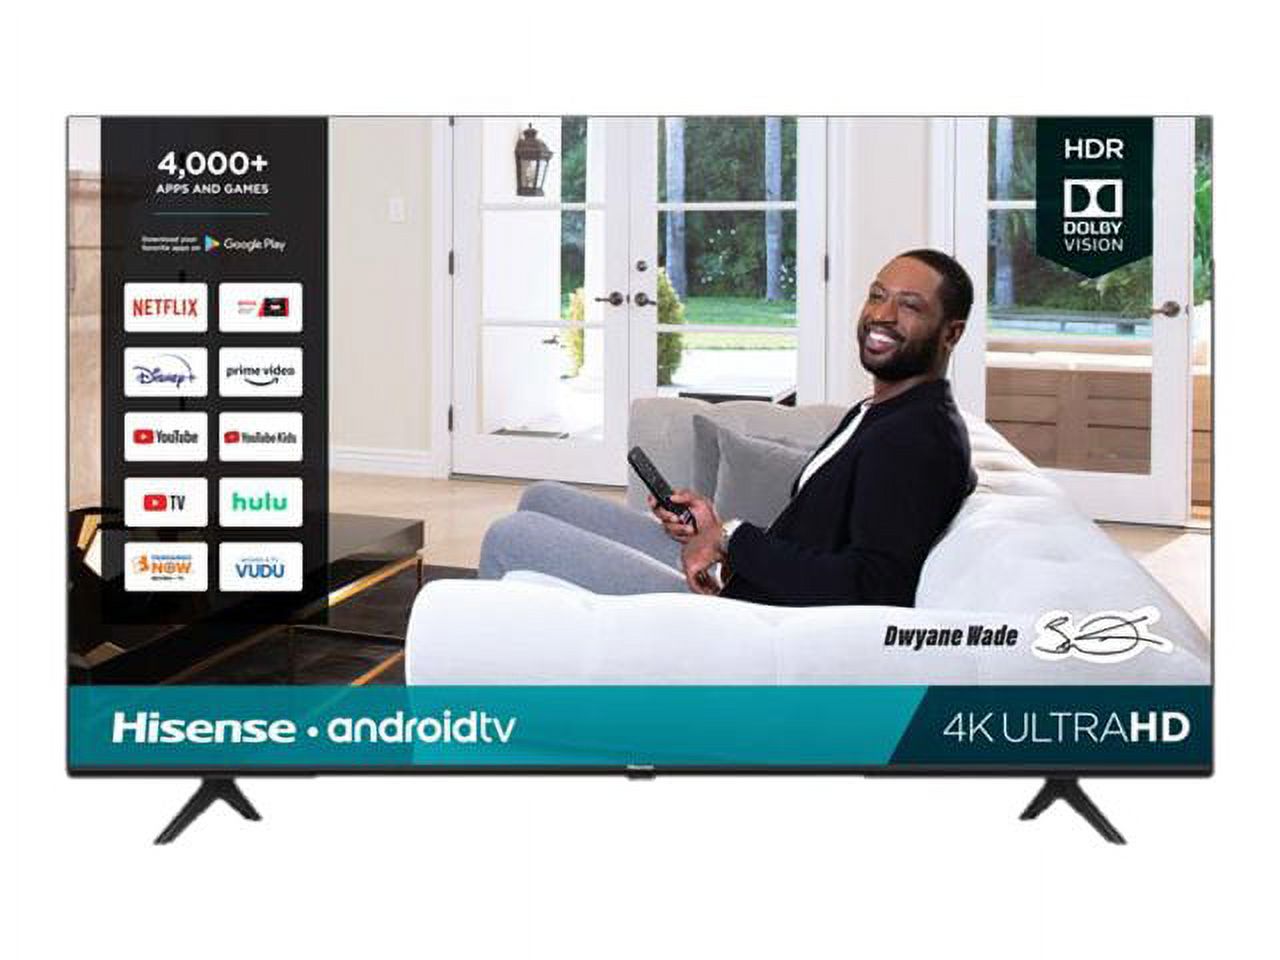 Hisense 43 inch H65-Series 4K UHD Smart Android TV (43H6570G) - image 1 of 11